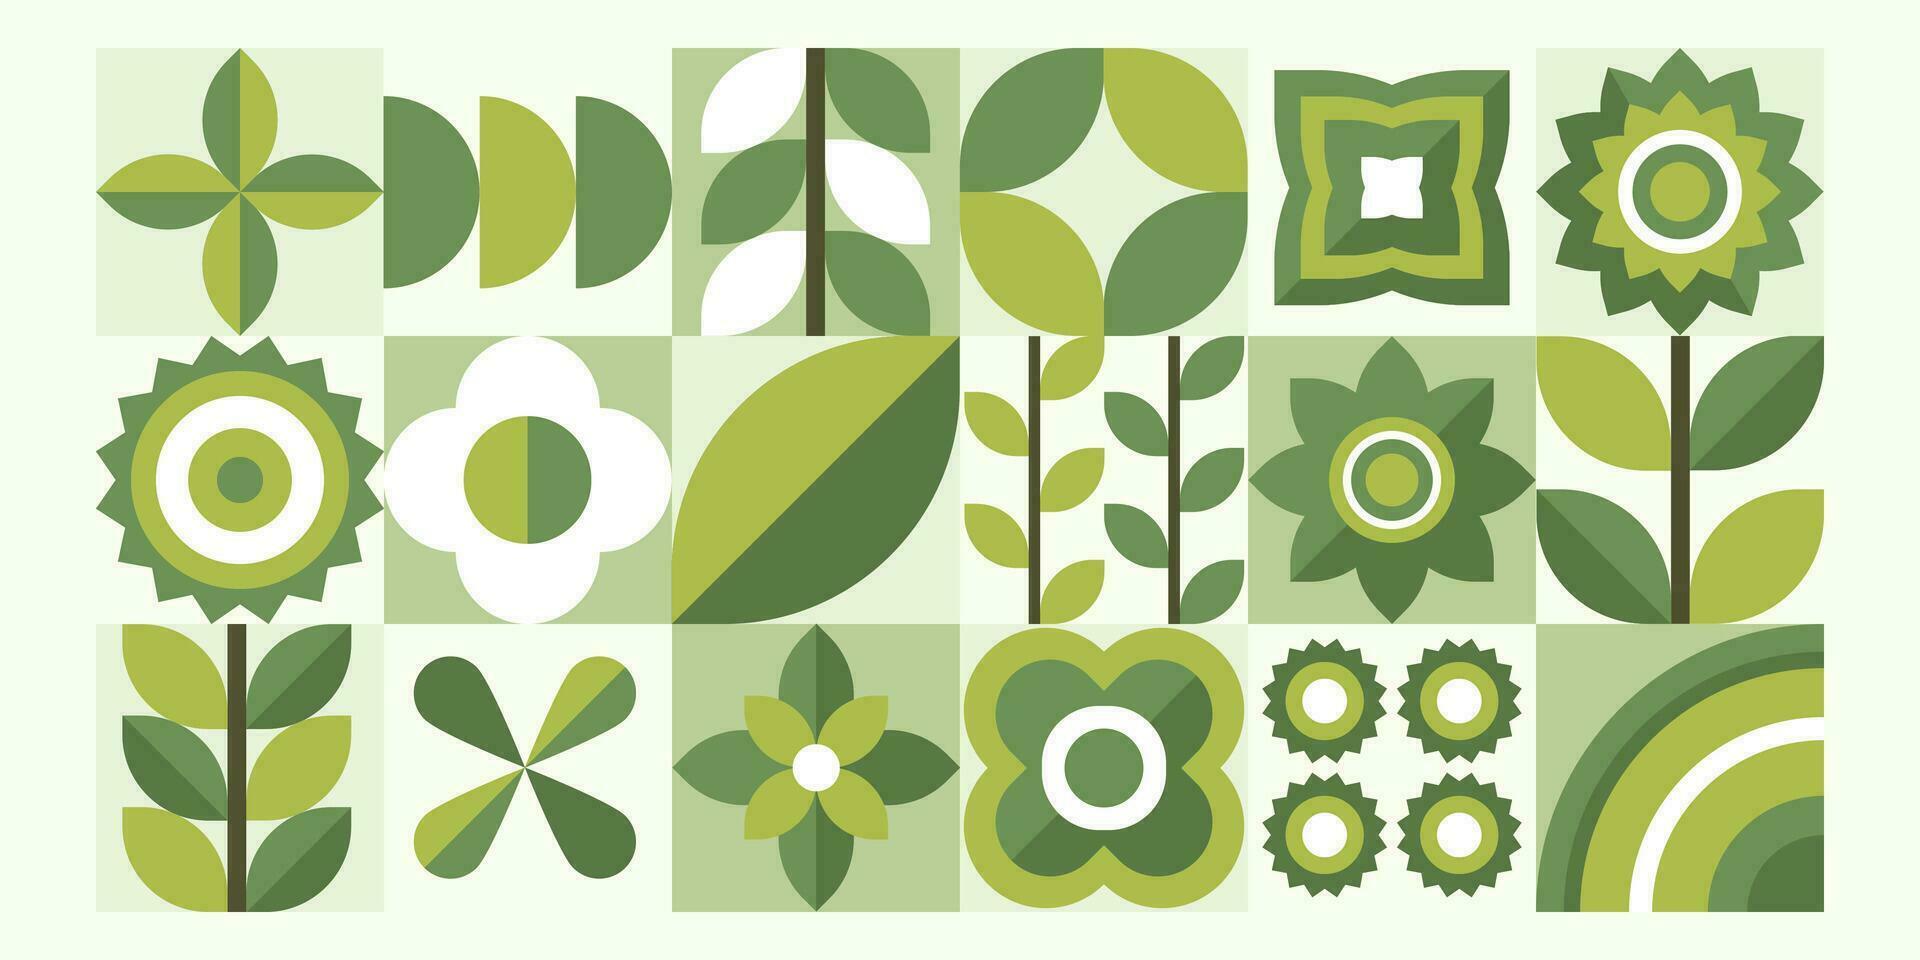 Geometric plants, natural pattern in tiles, decorative abstract art with flowers and leaves, vector illustration, banner, wallpaper.